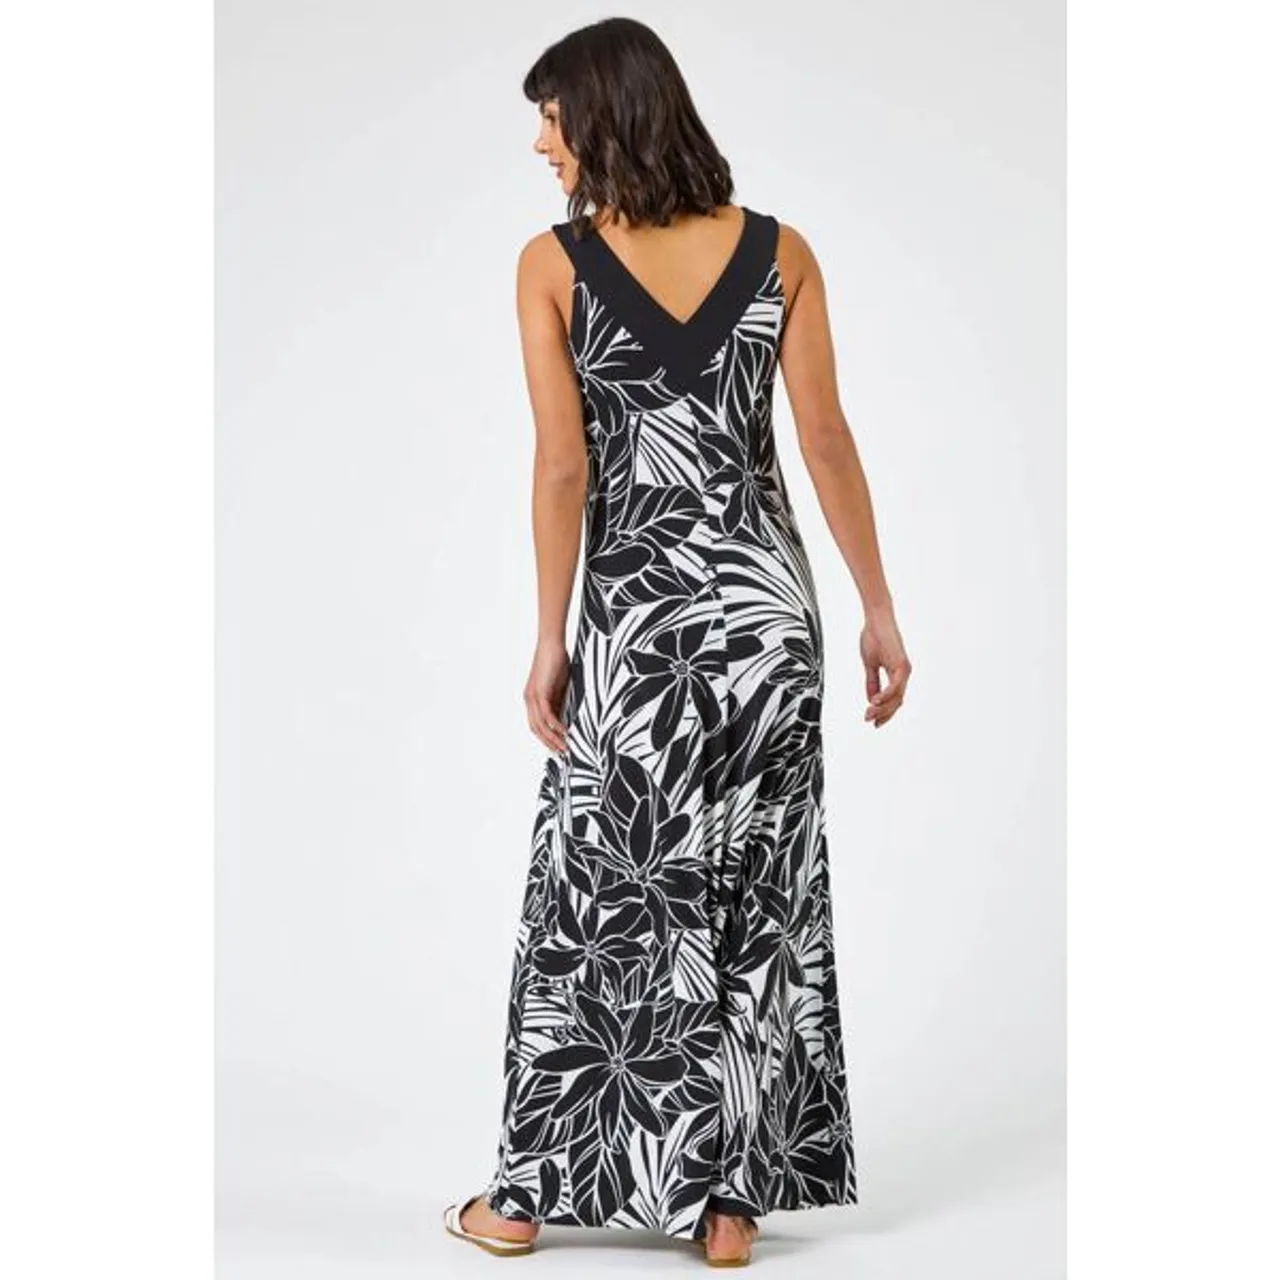 Roman Floral Print Contrast Band Maxi Dress in Black 10 female